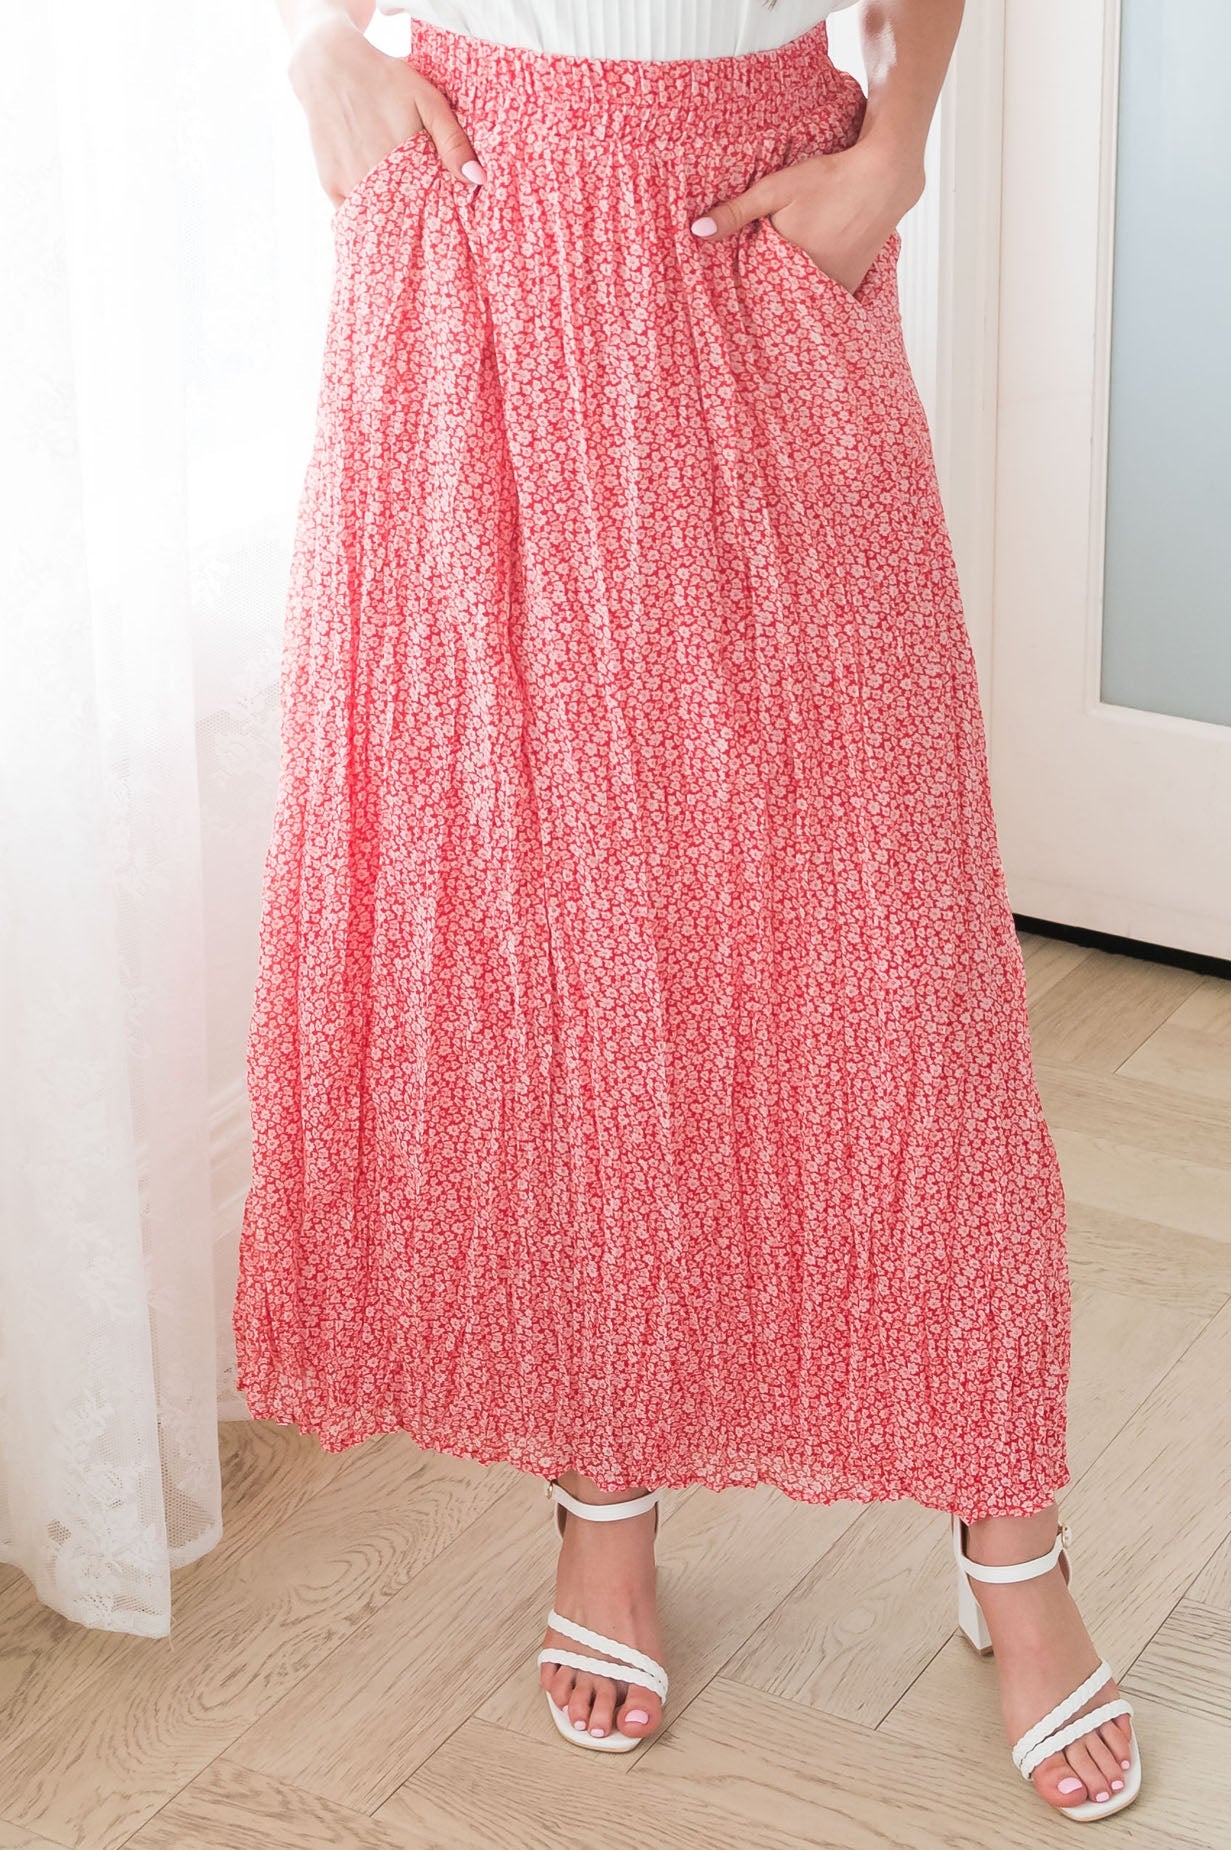 Ditzy Floral Textured Maxi Skirt